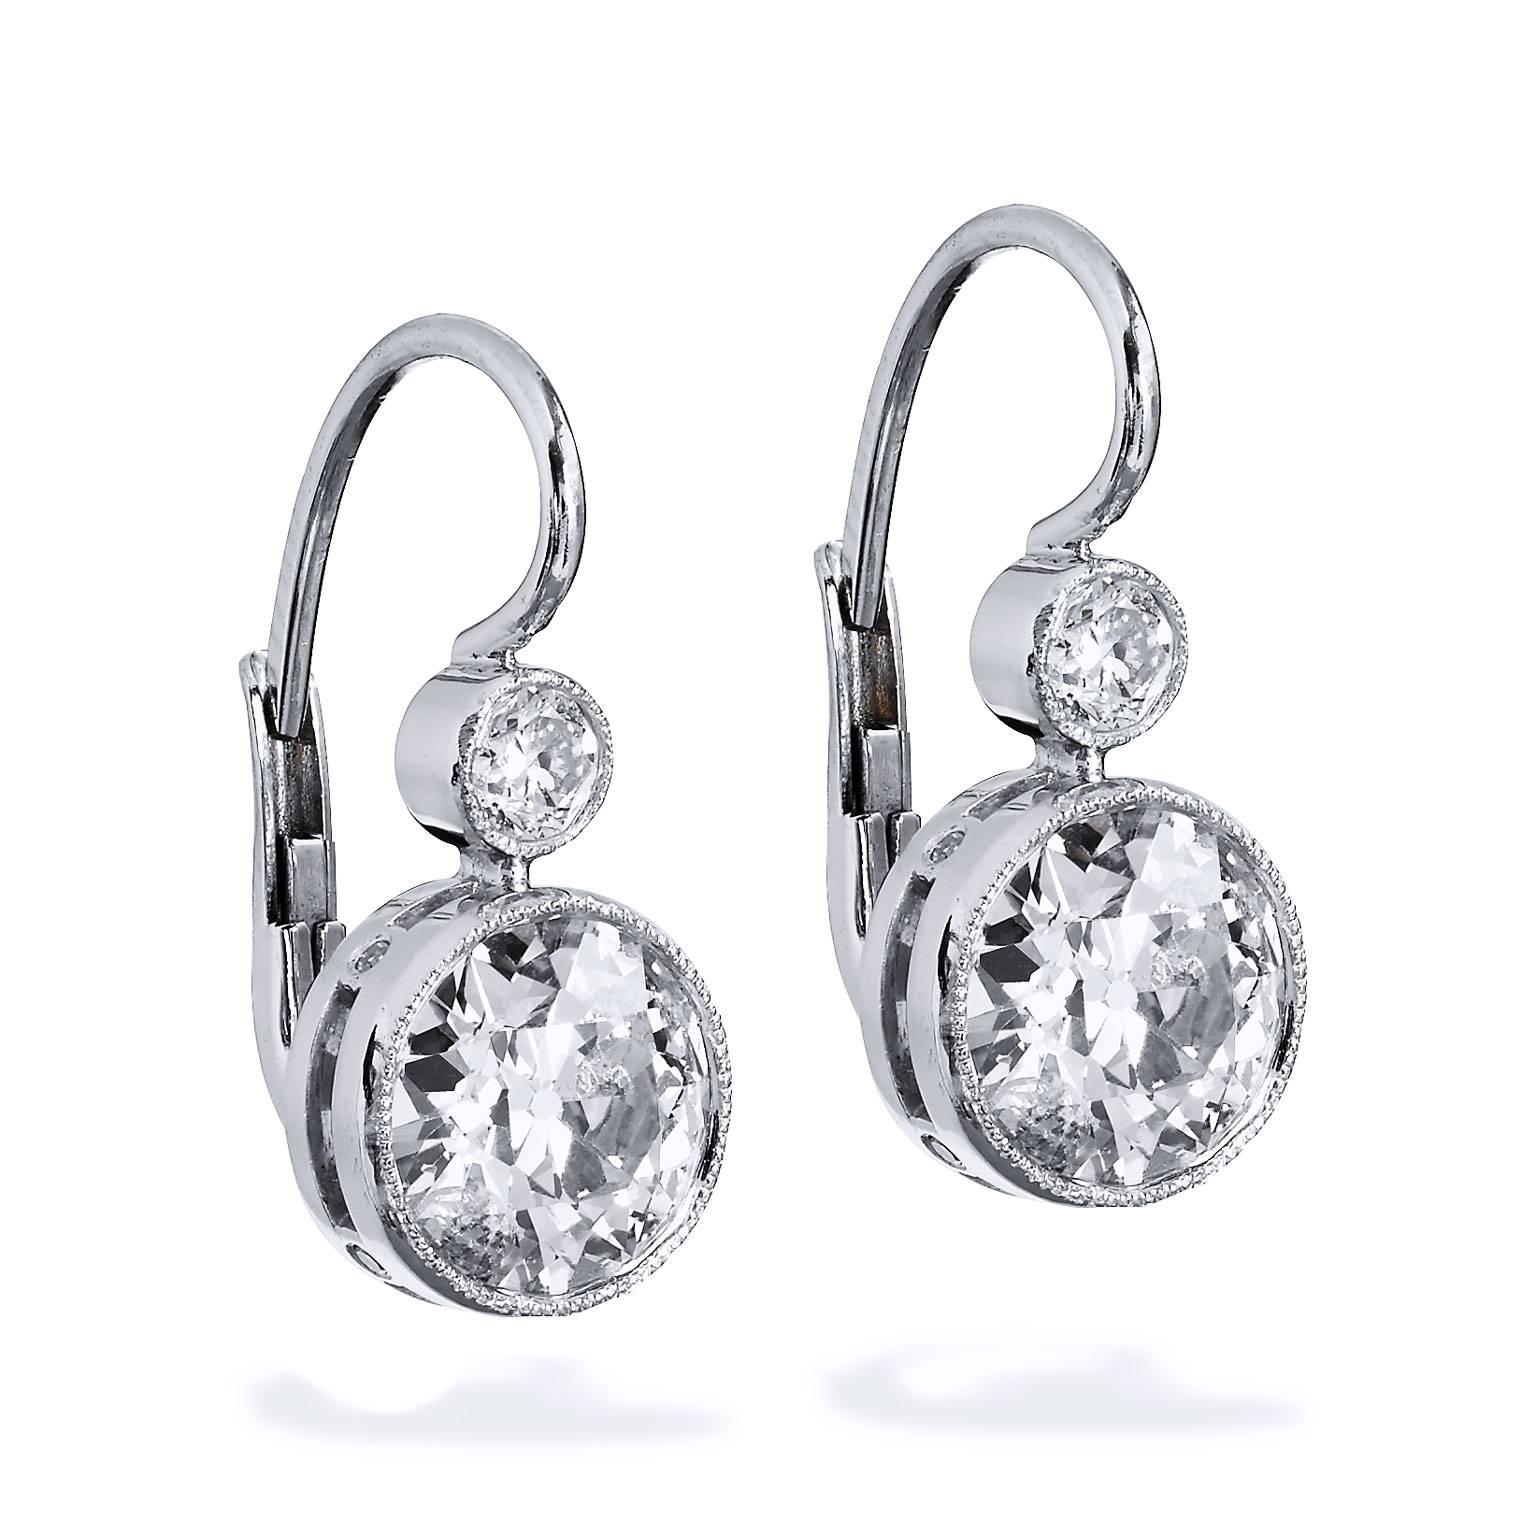 These are one of a kind and handmade by H&H Jewels.  They feature 2.90 carat Old European cut diamonds.
 
Both platinum and 18 karat white gold is used on these bezel set Old European cut diamonds.  
(1.54 carat, K/SI1;1.36 carat, J/I1). 

Two